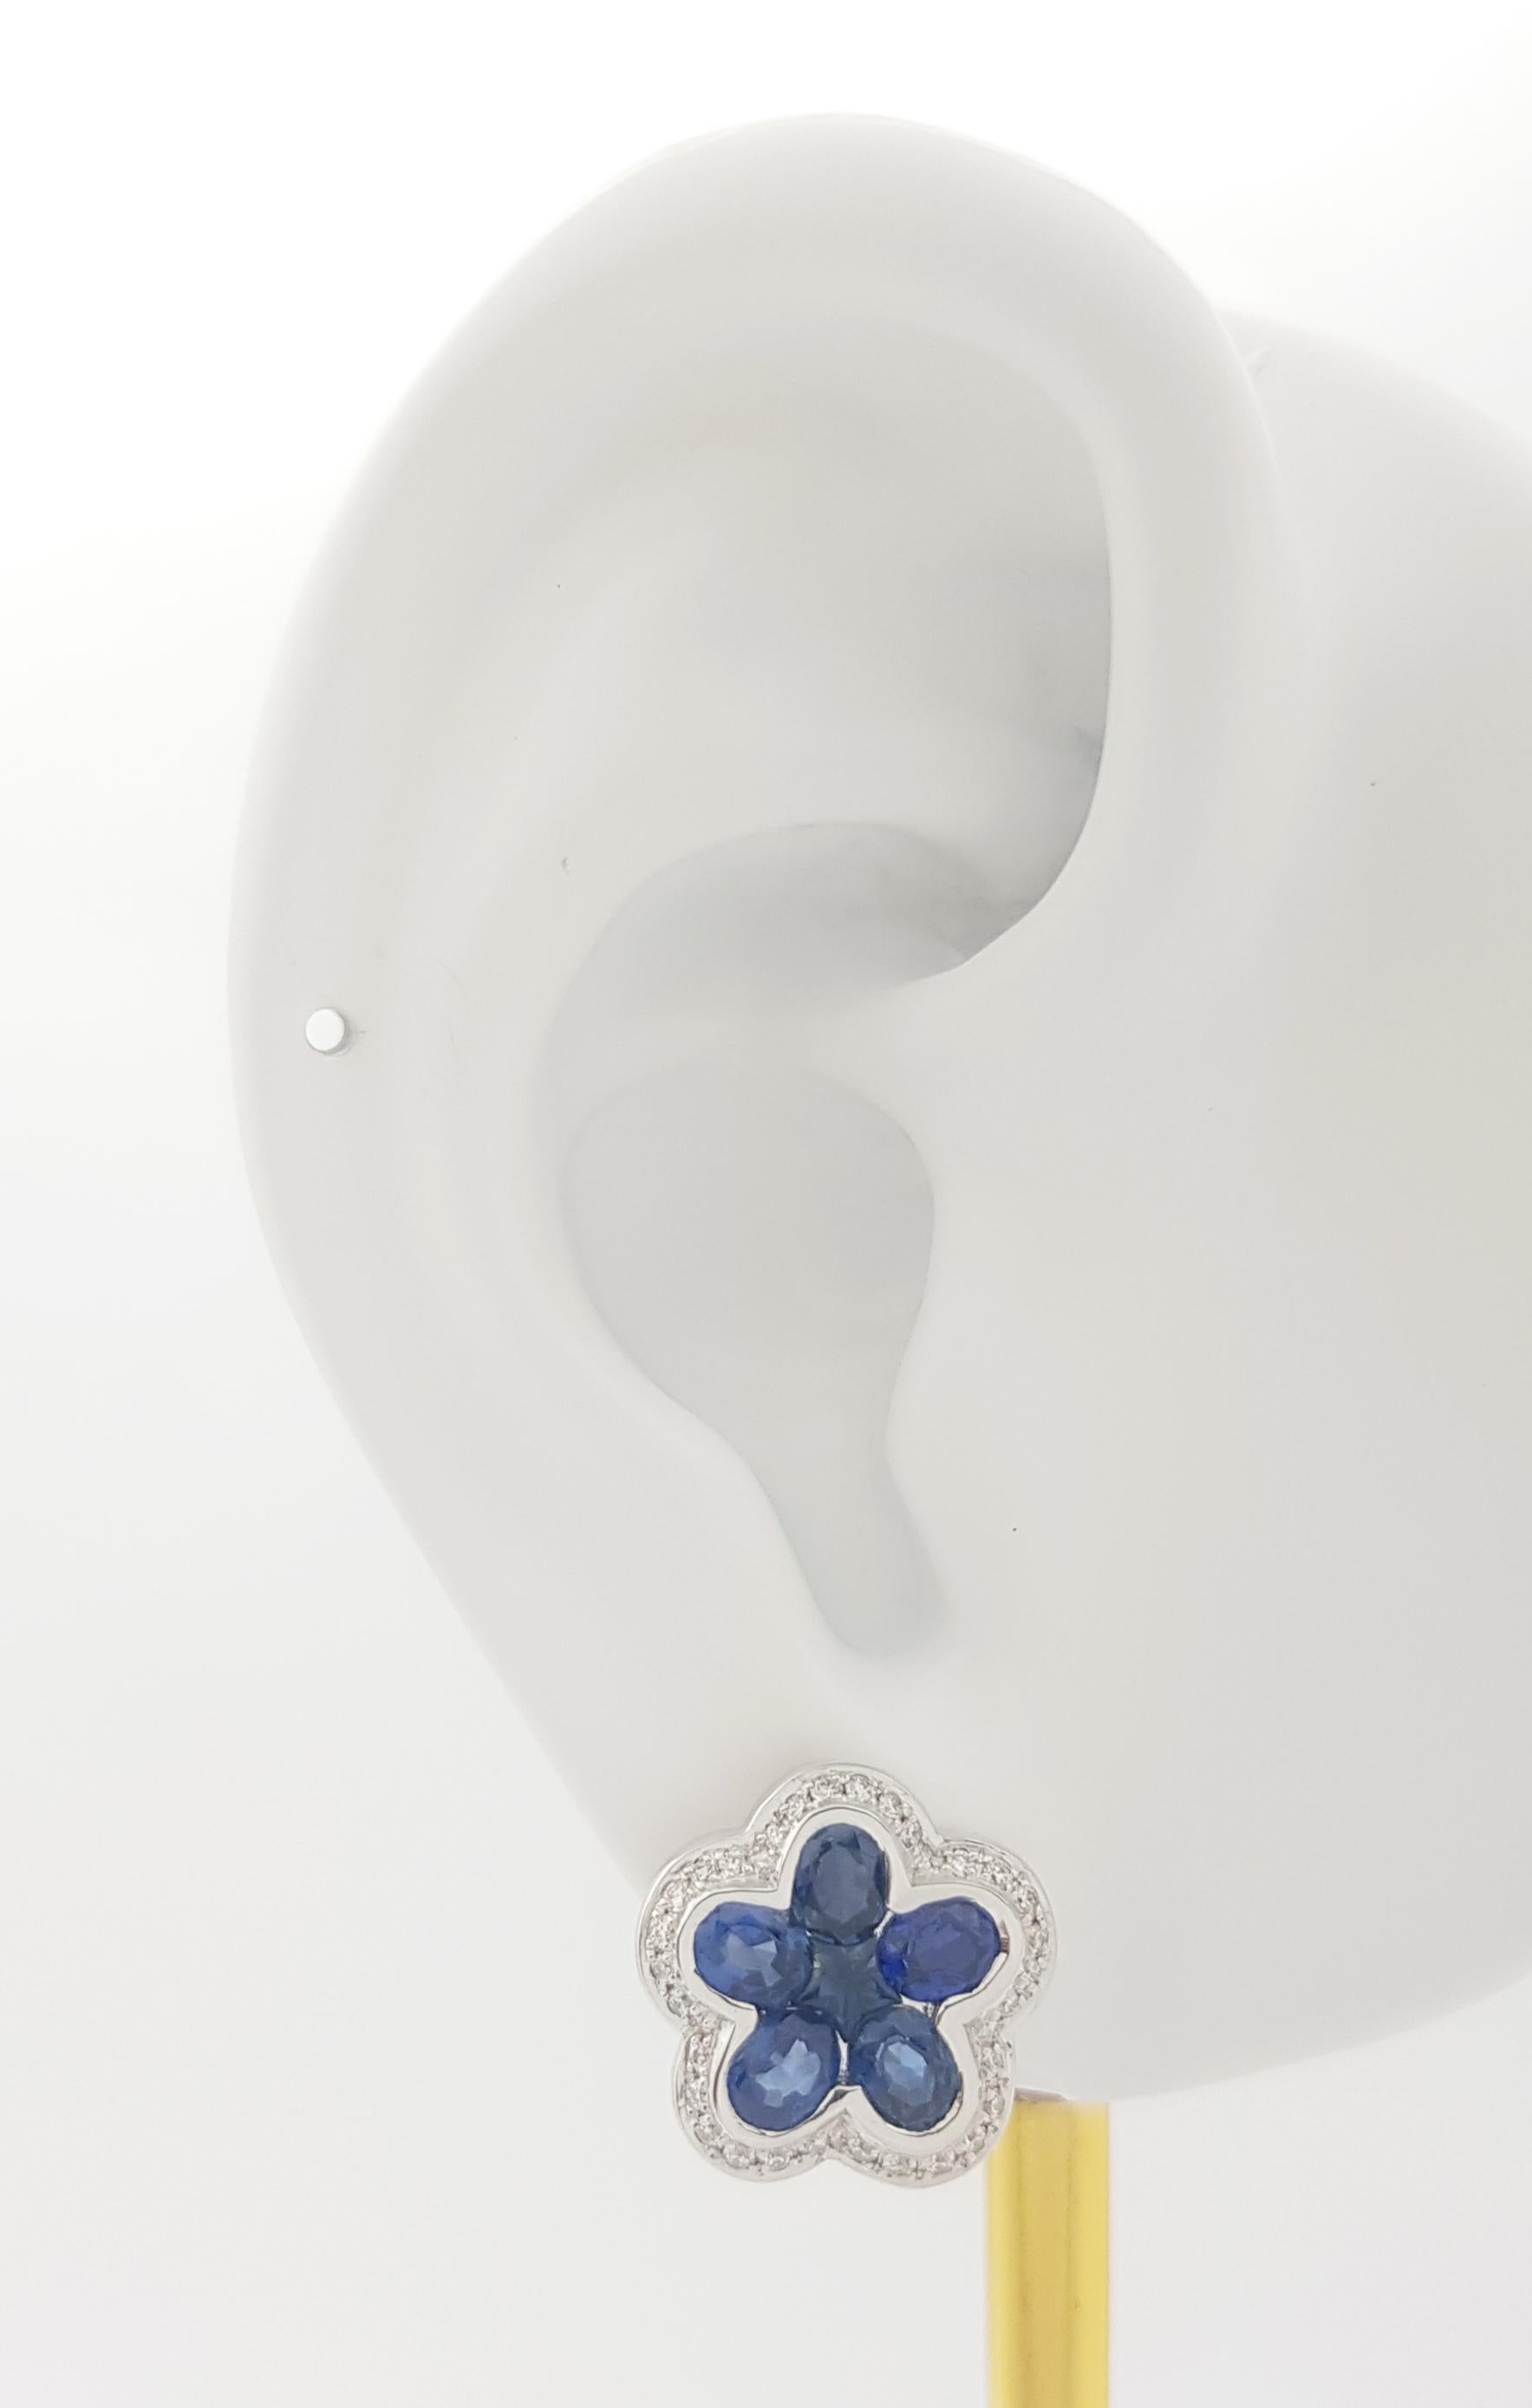 Blue Sapphire 2.90 carats with Diamond 0.25 carat Earrings set in 18K White Gold Settings

Width: 1.3 cm 
Length: 1.3 cm
Total Weight: 8.99 grams

